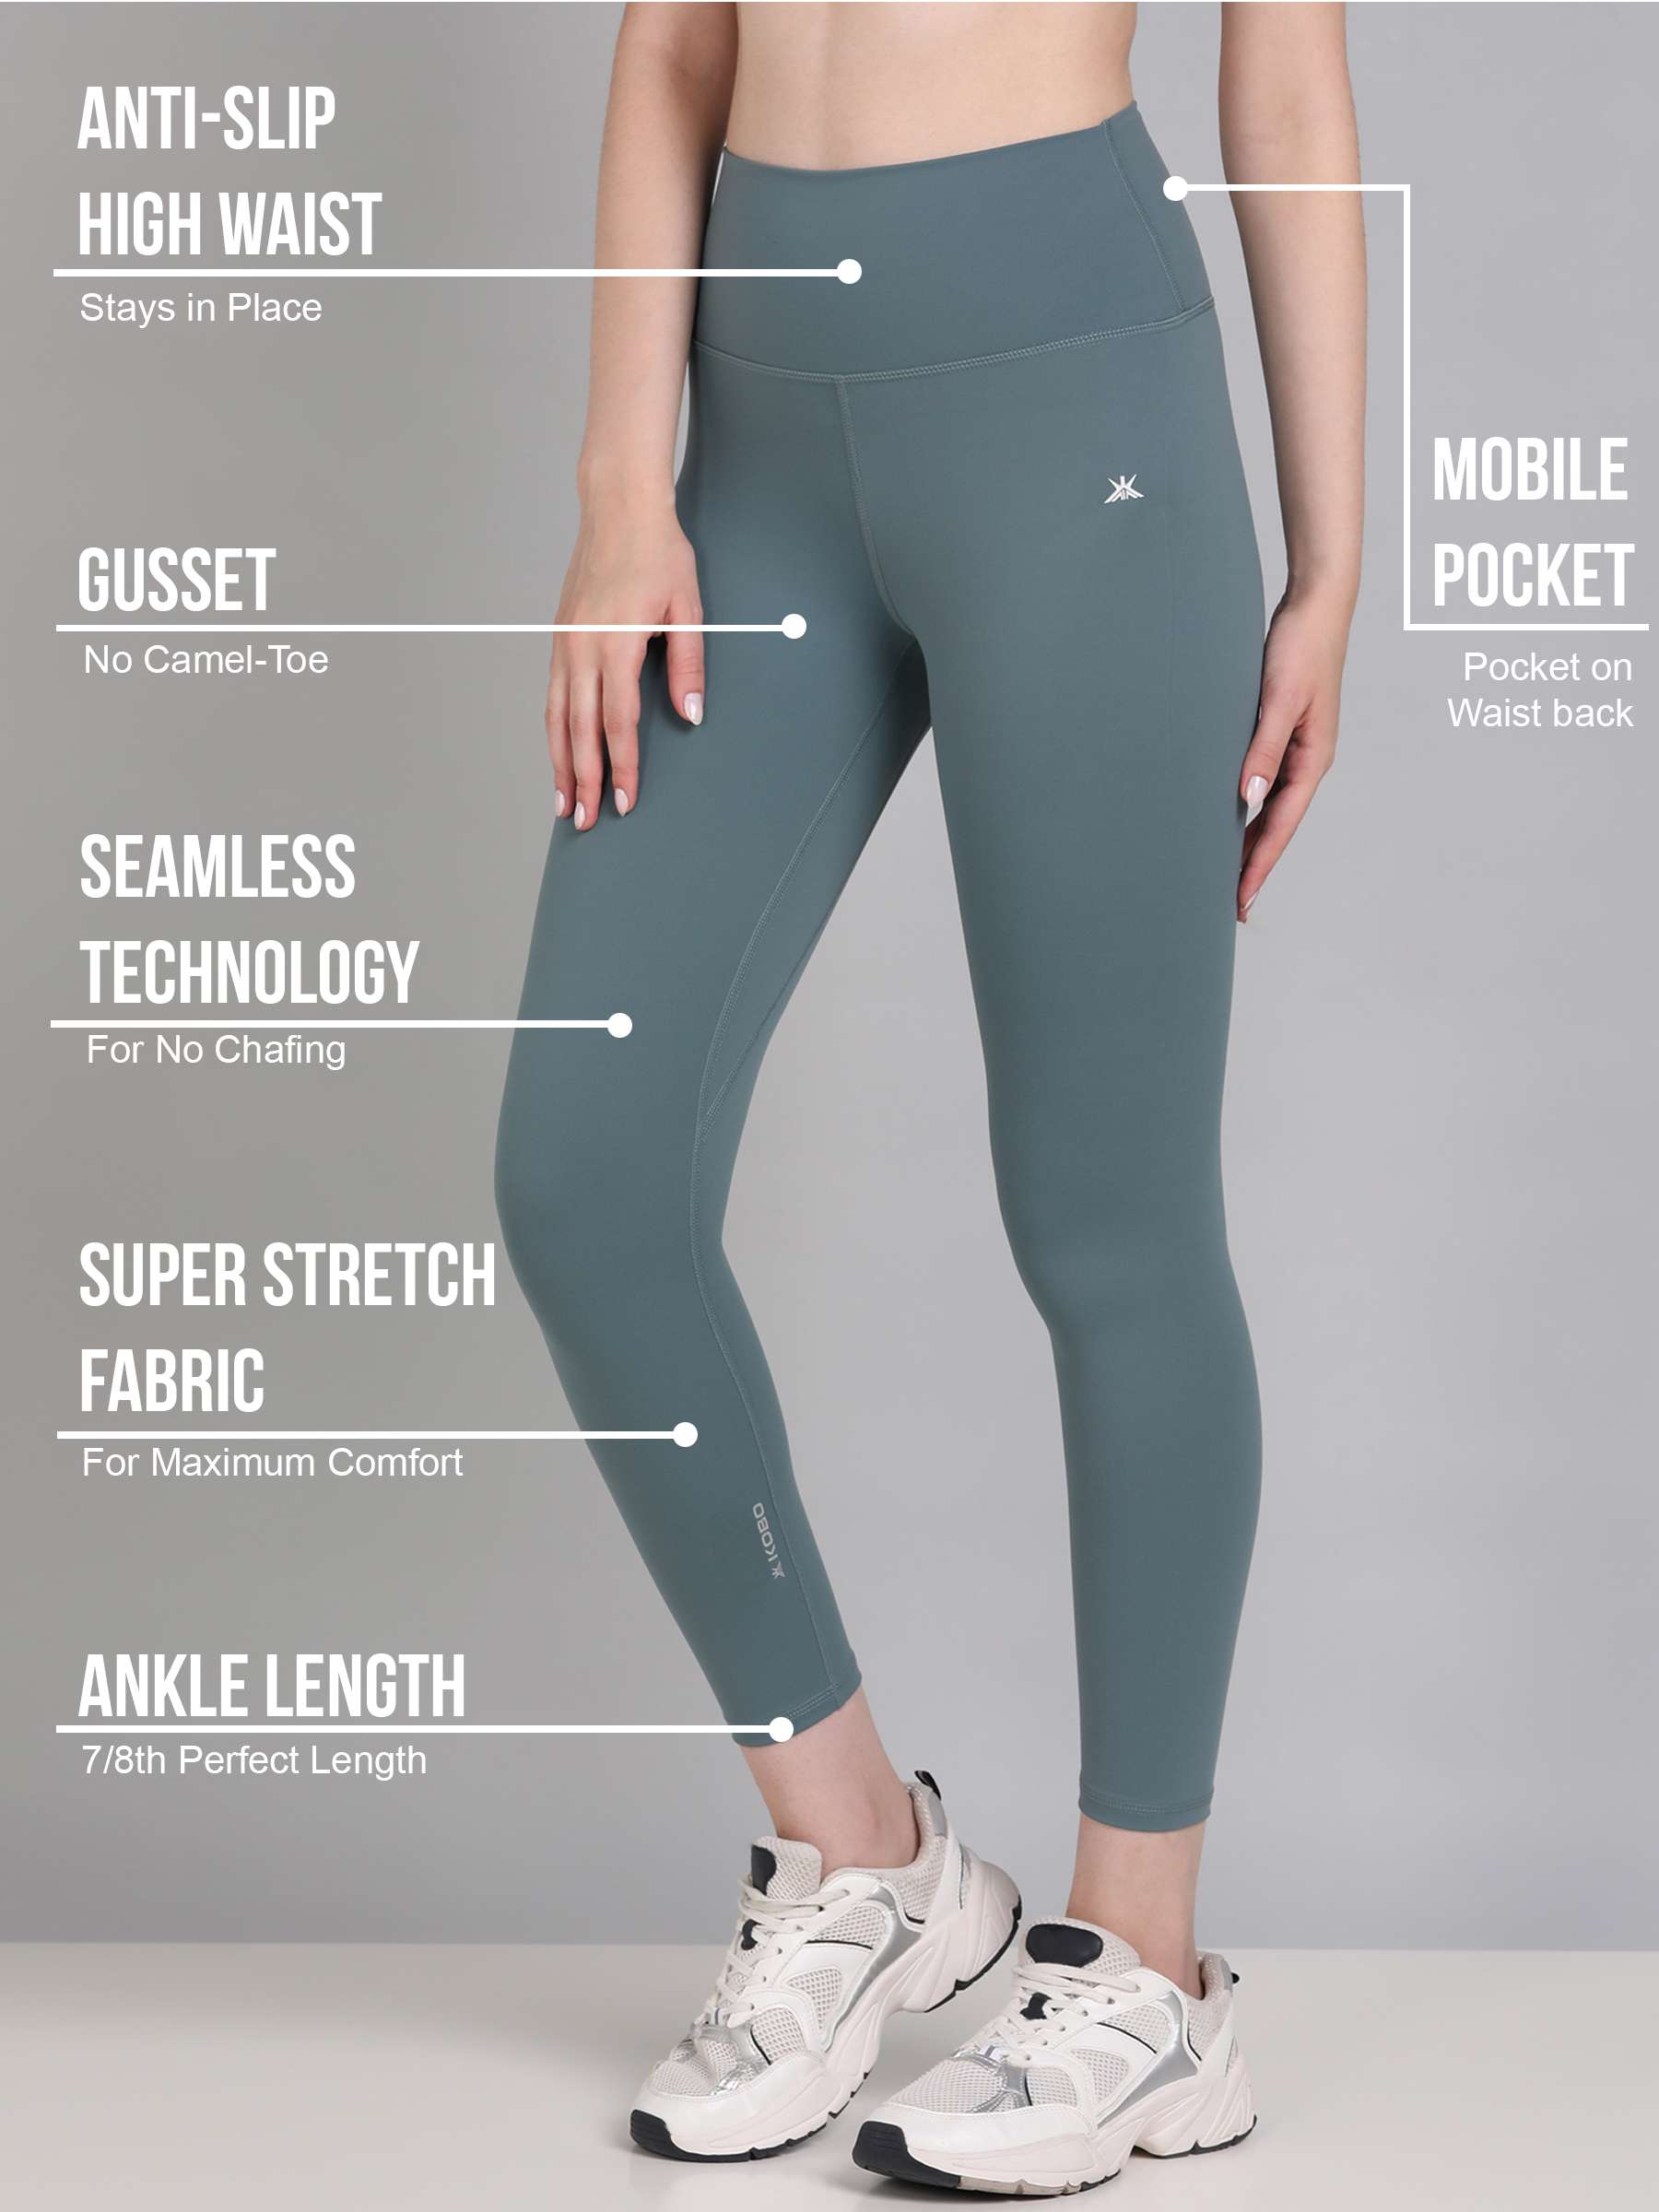 Classic Lyocell Solid 3/4 Tights For Women at Rs 638, Tights For Women,  Gym Workout Tights, Women Sports Tight, Women Workout Tight, Women Seamless  Legging - Store Apt, Pathanamthitta